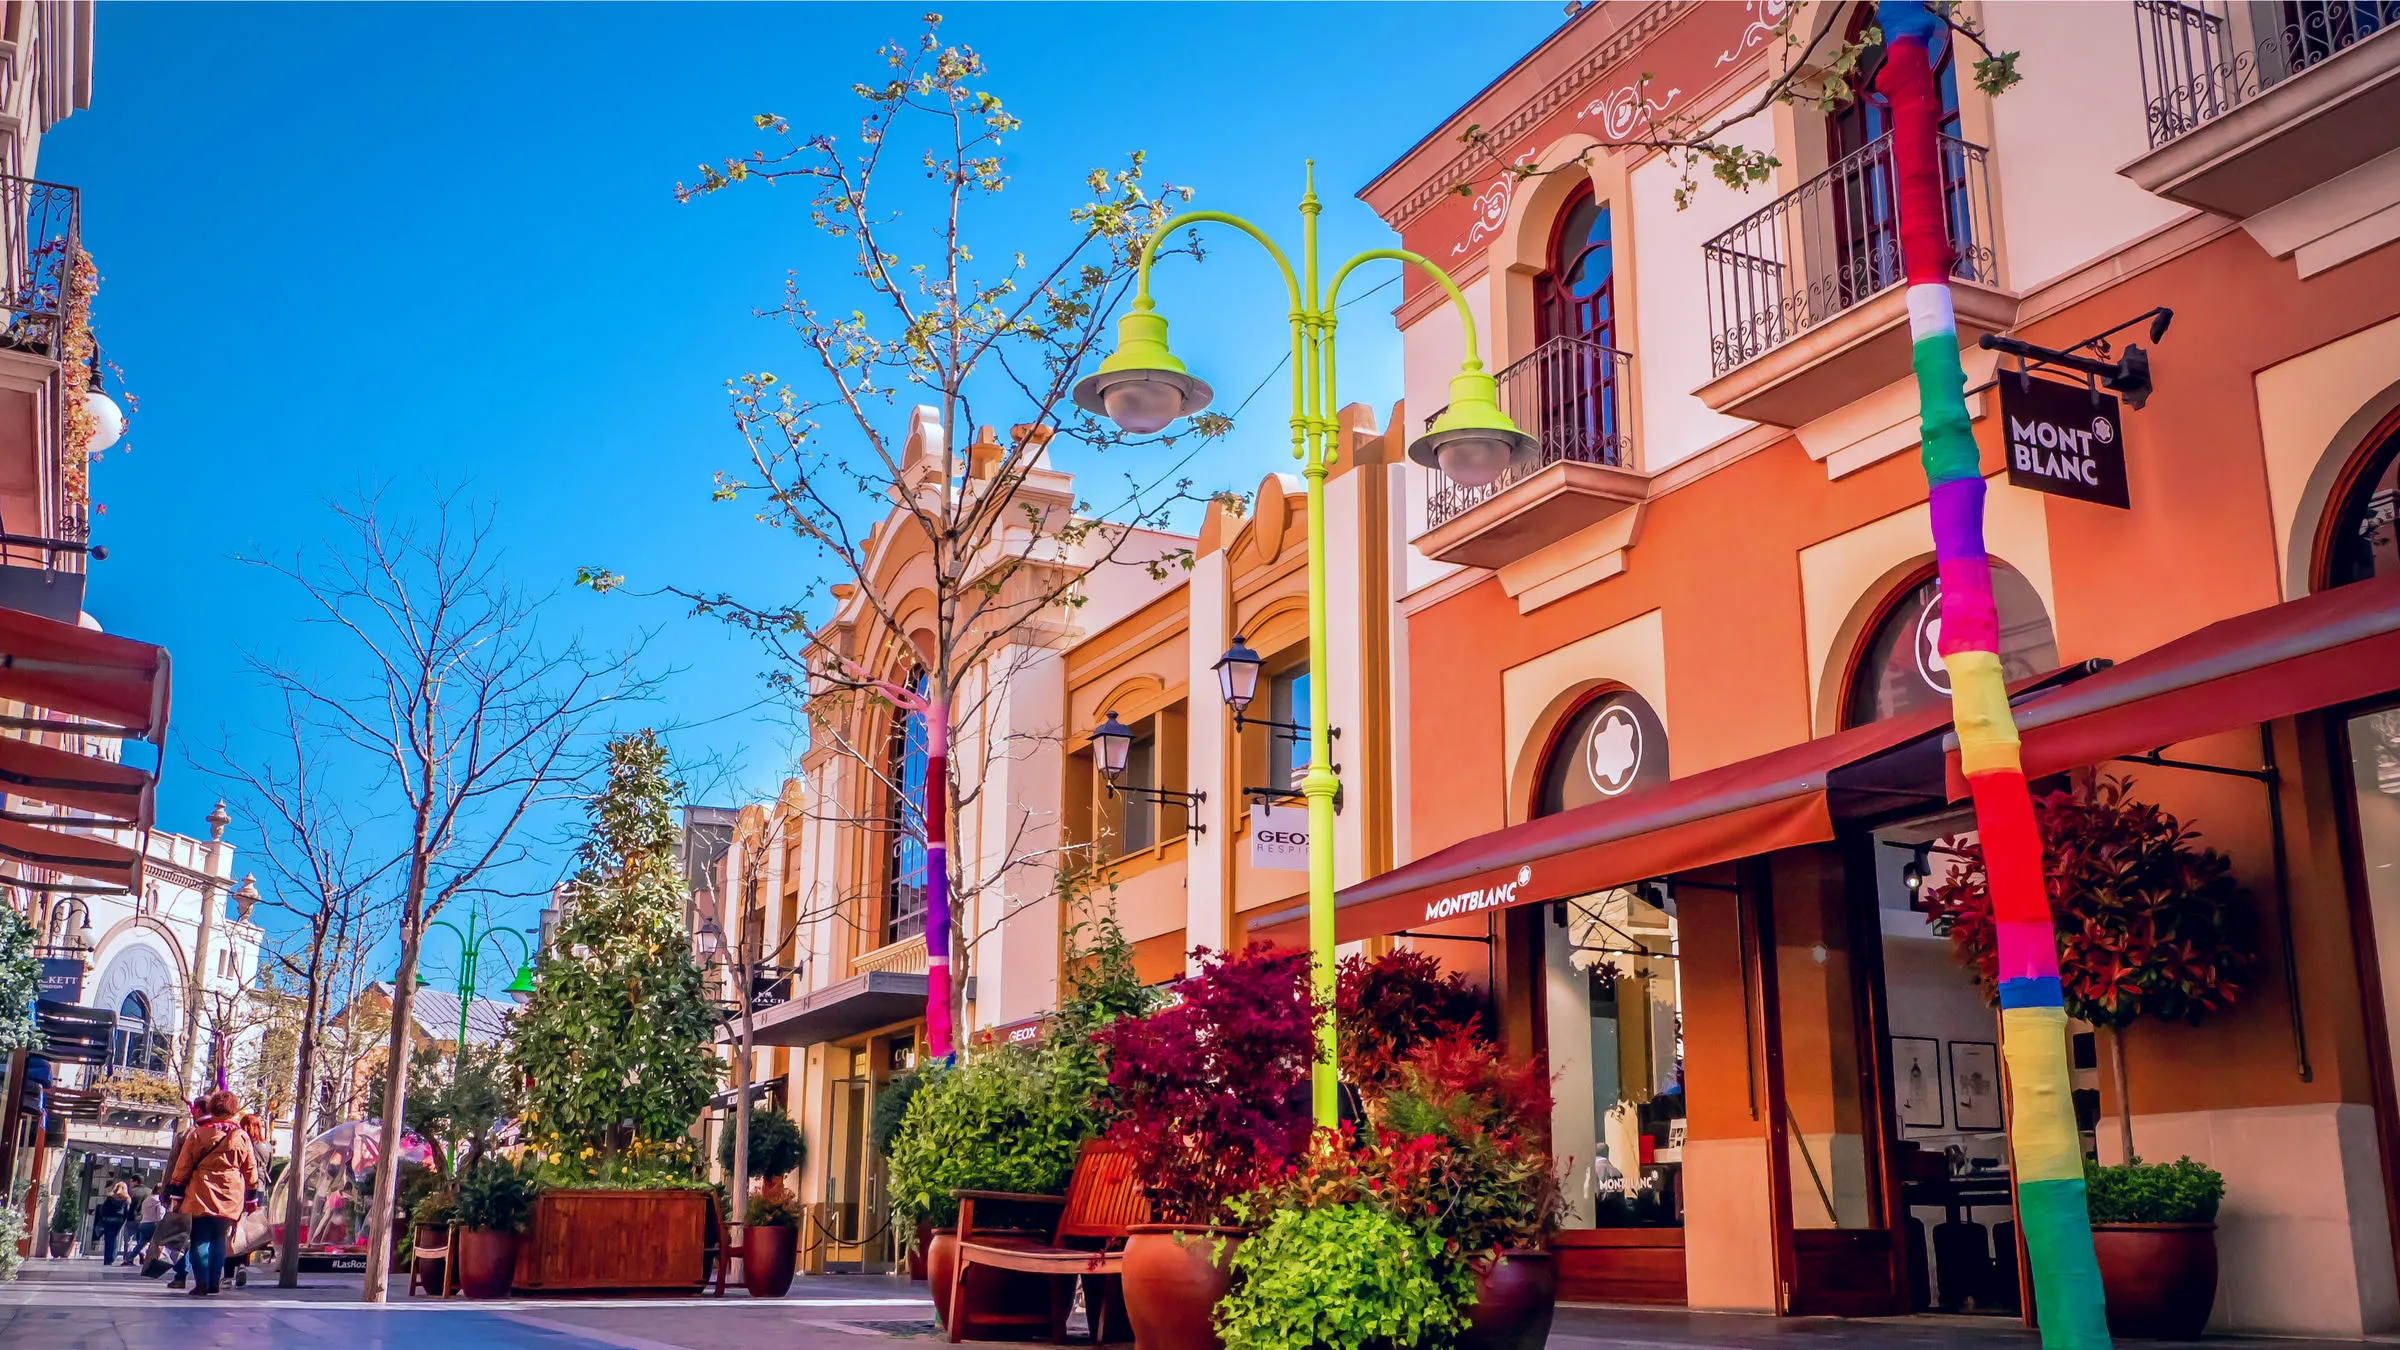 Las Rozas Village in Spain, europe | Handbags,Shoes,Accessories,Clothes,Sportswear,Watches,Travel Bags - Country Helper